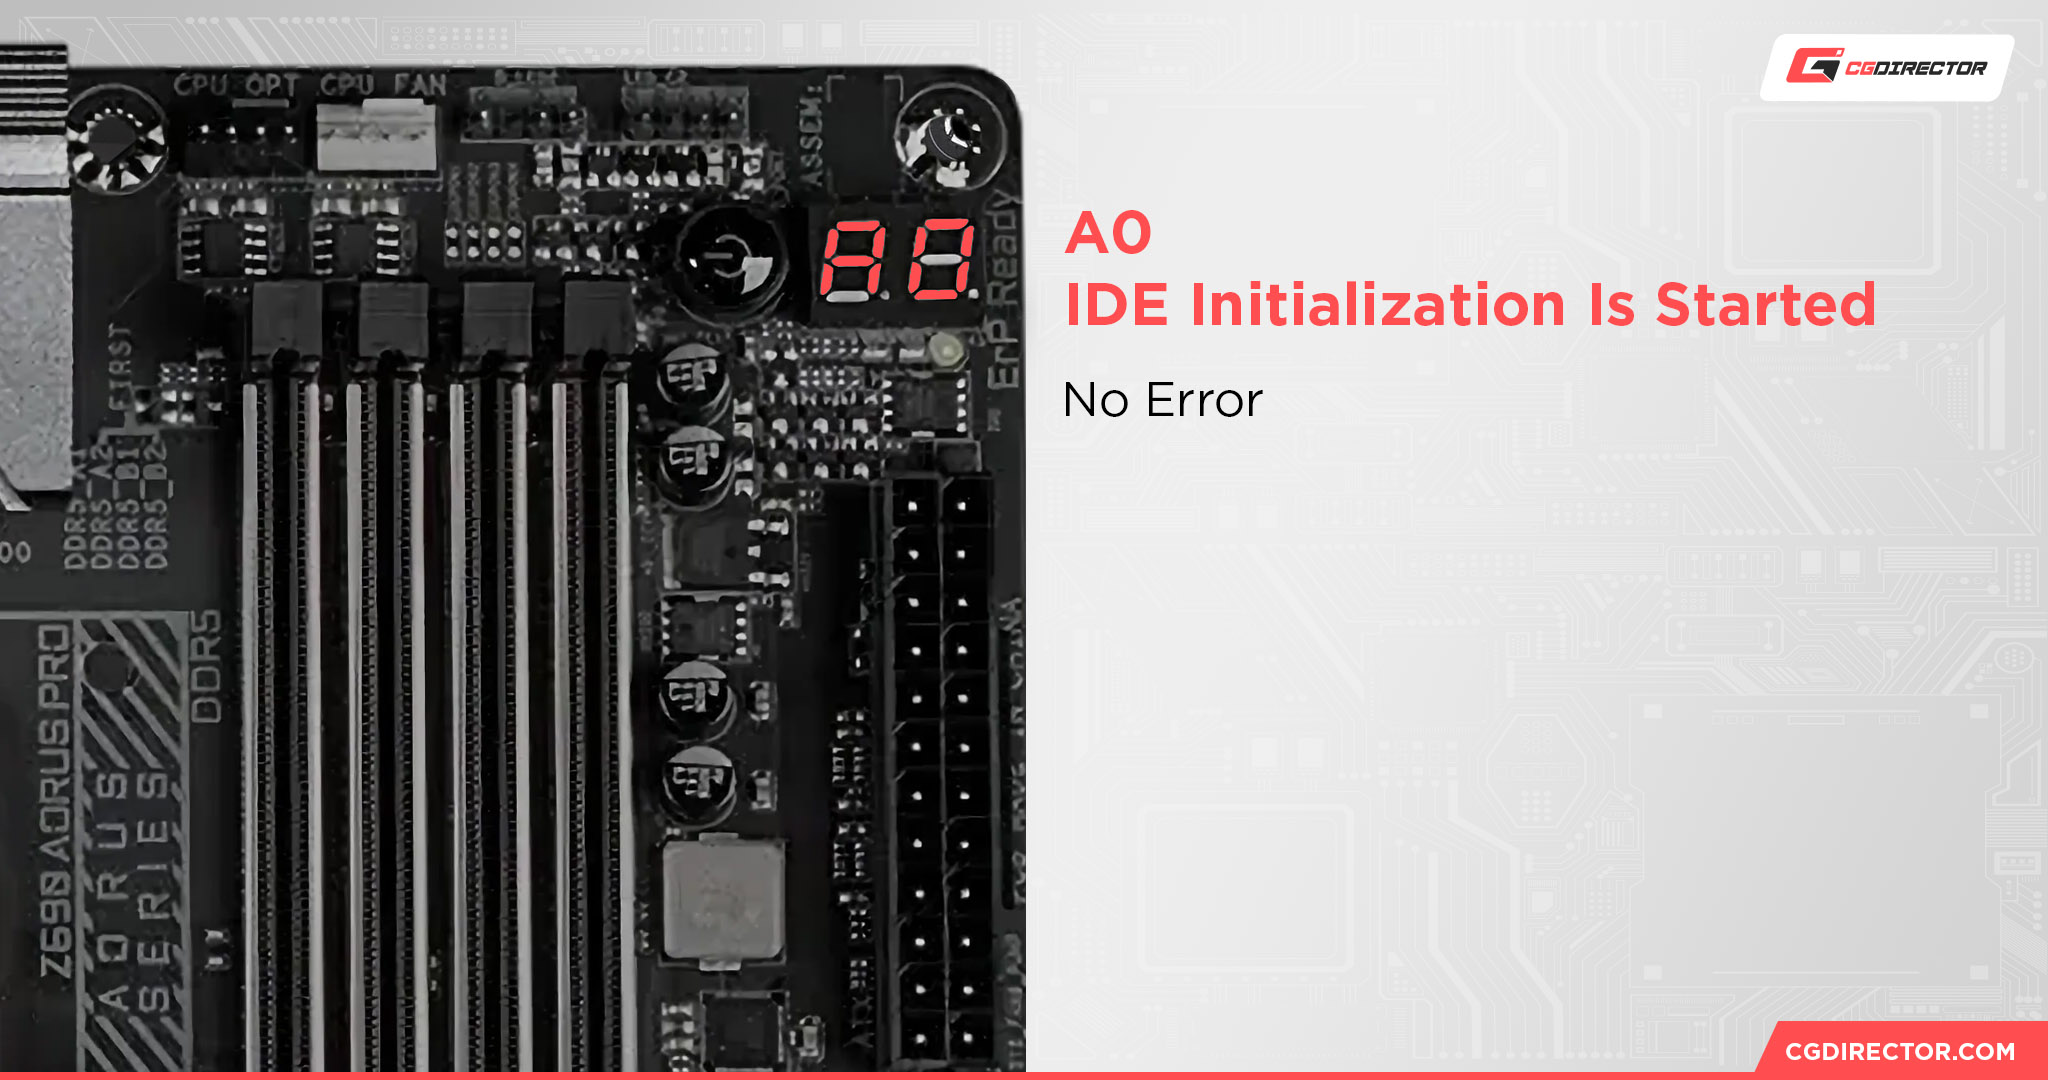 Gigabyte LED A0 – IDE Initialization Is Started